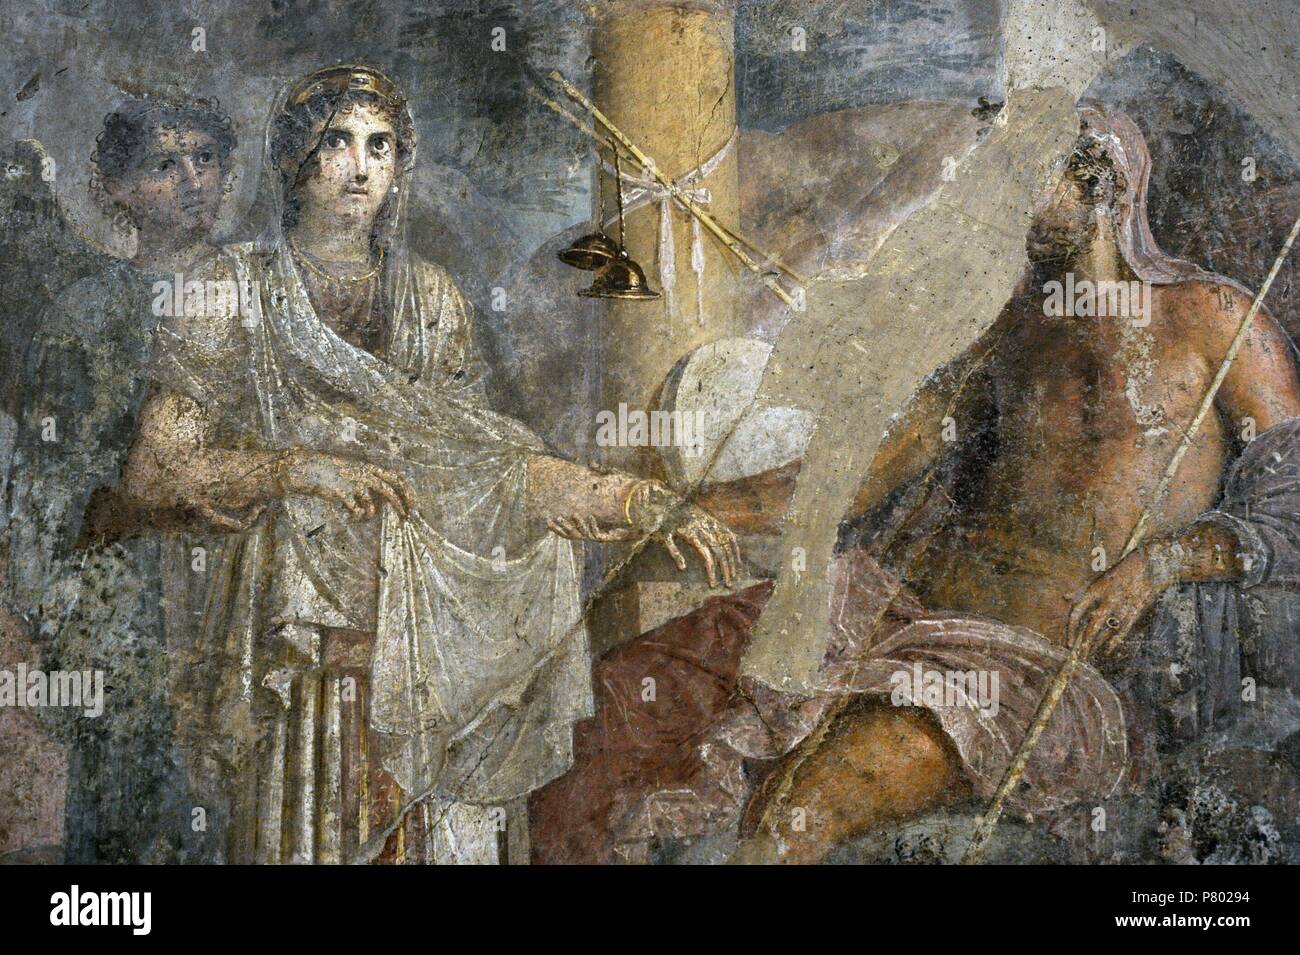 Hera, waring the formal clothes of the bride is pushed towards Zeus by Iris. The small personifications crowned with flowers refer to the regeneration of nature that derives from the divine union. House of the Tragic Poet. Pompeii. National Archaeological Museum, Naples. Italy. Stock Photo